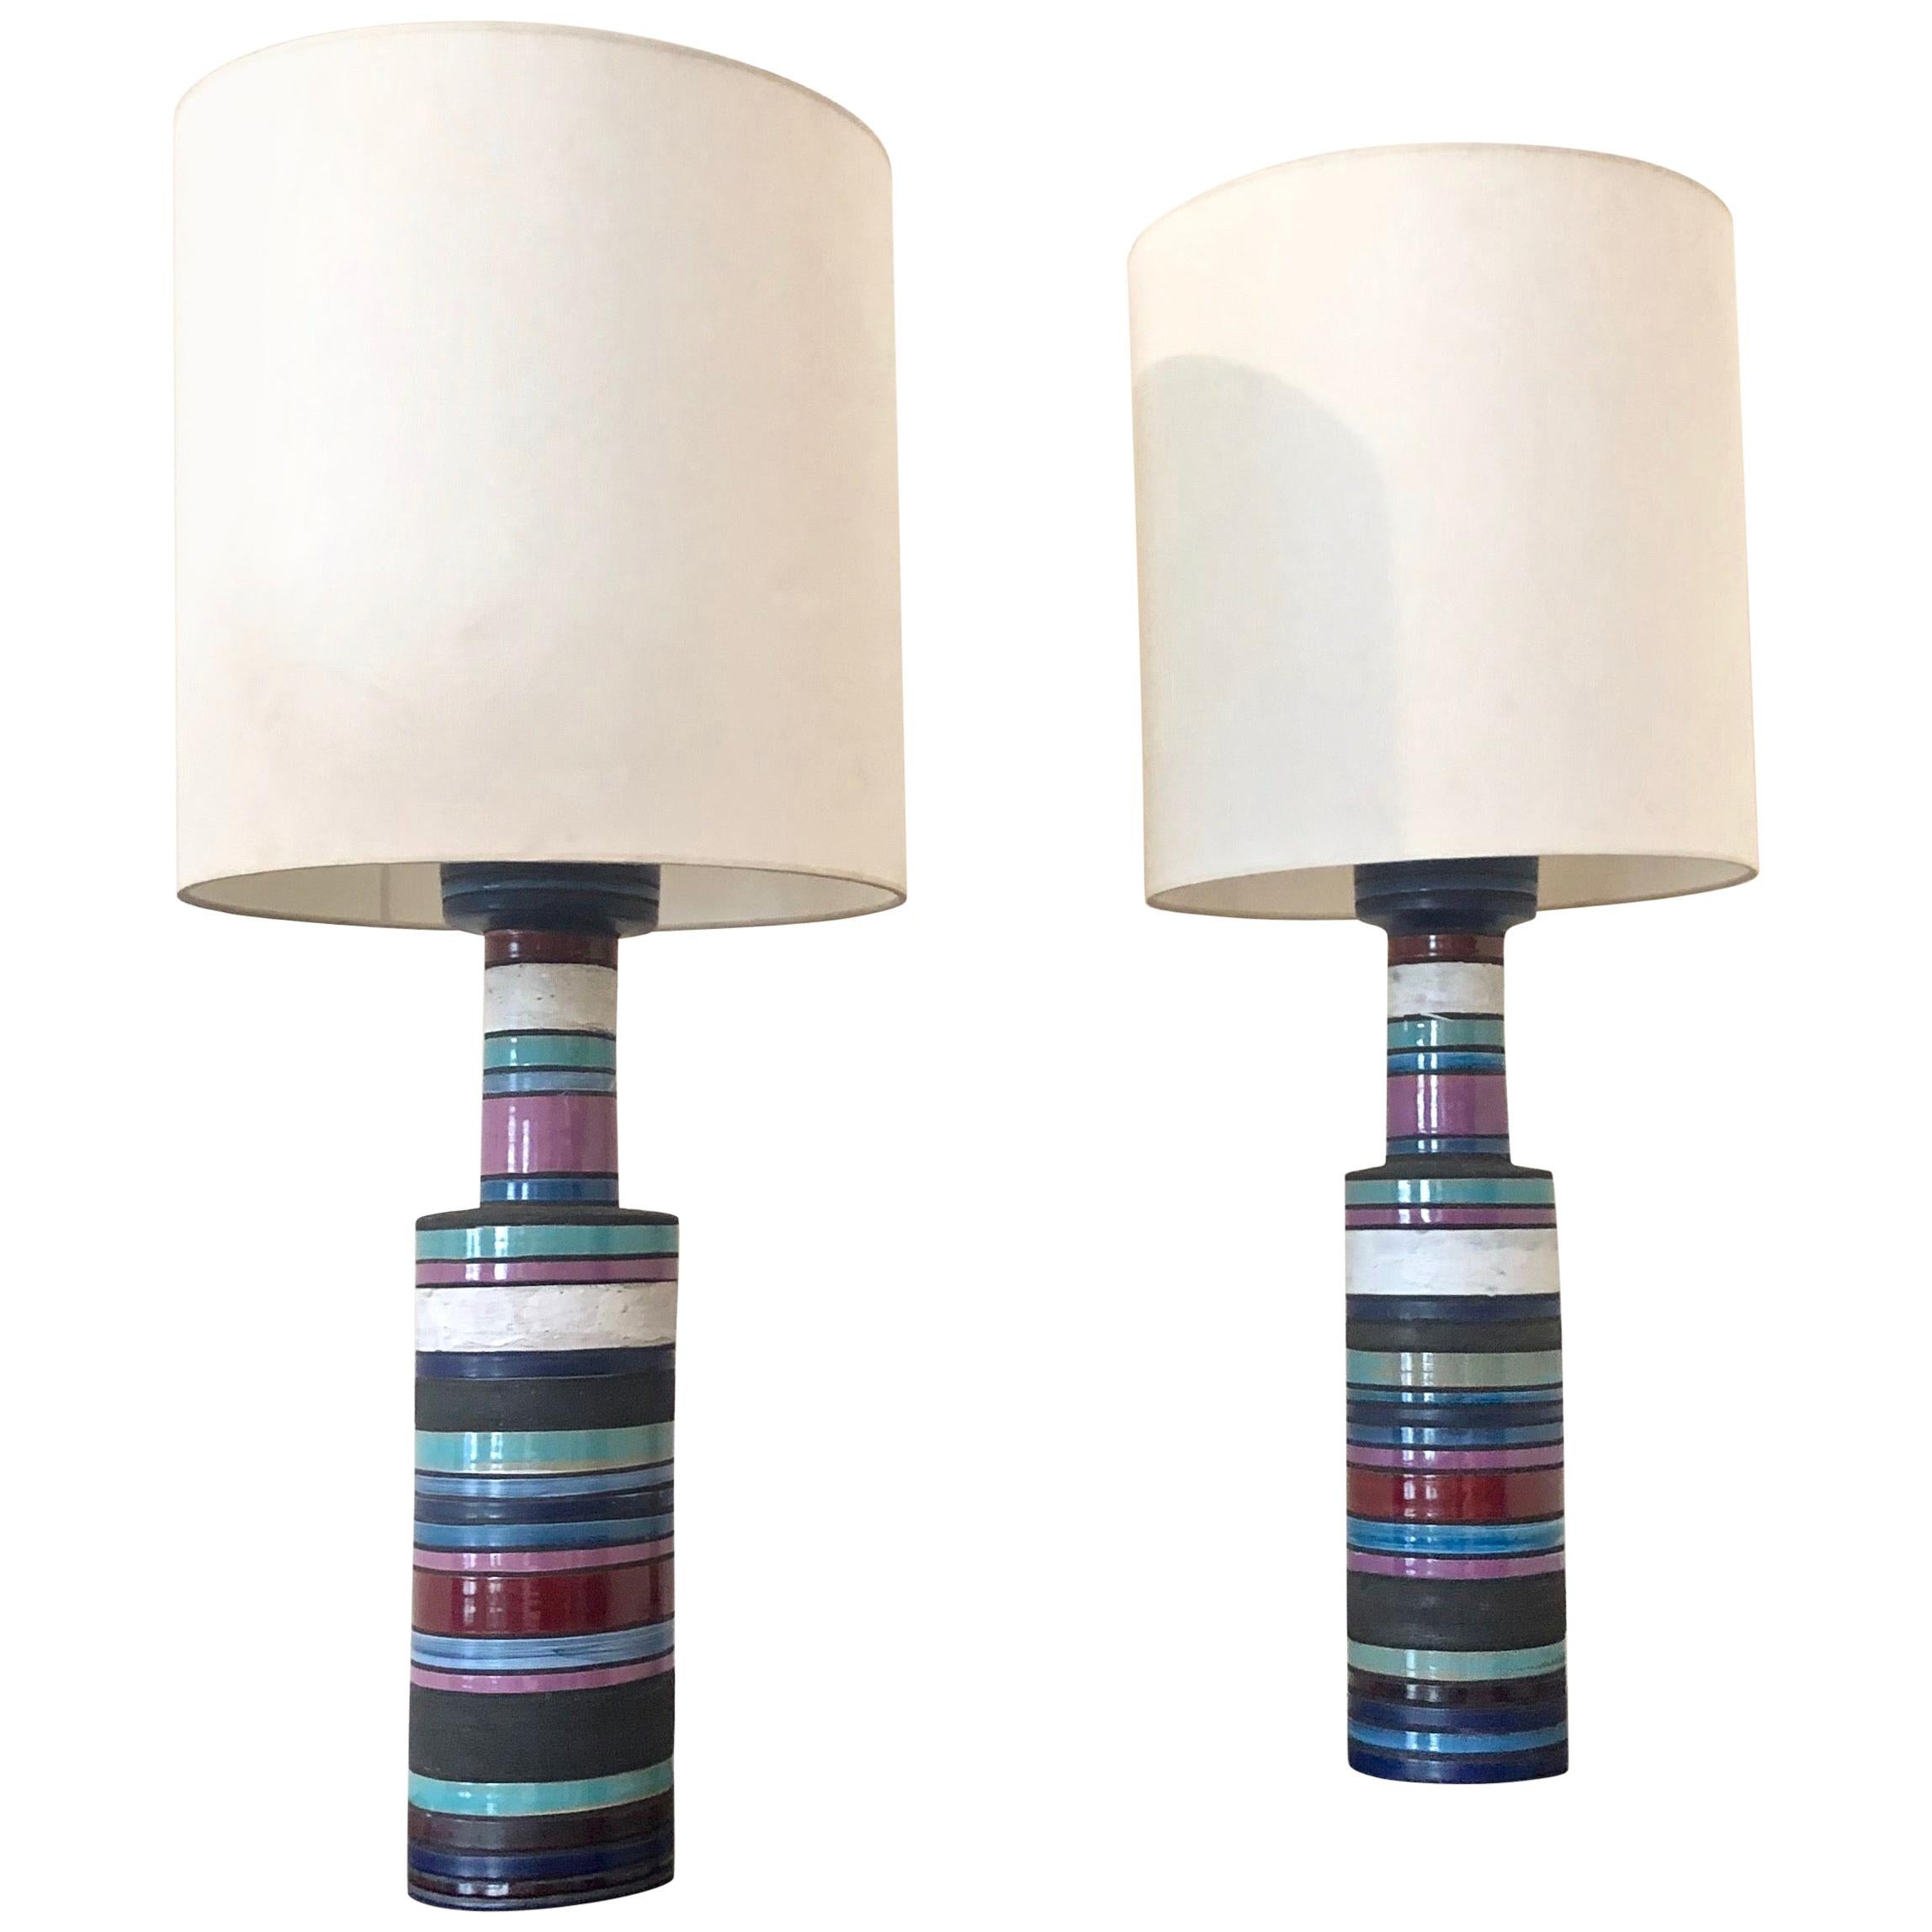 Pair of "Cambogia" Table Lamps by Aldo Londi for Bitossi, Raymor, Italy, 1950s